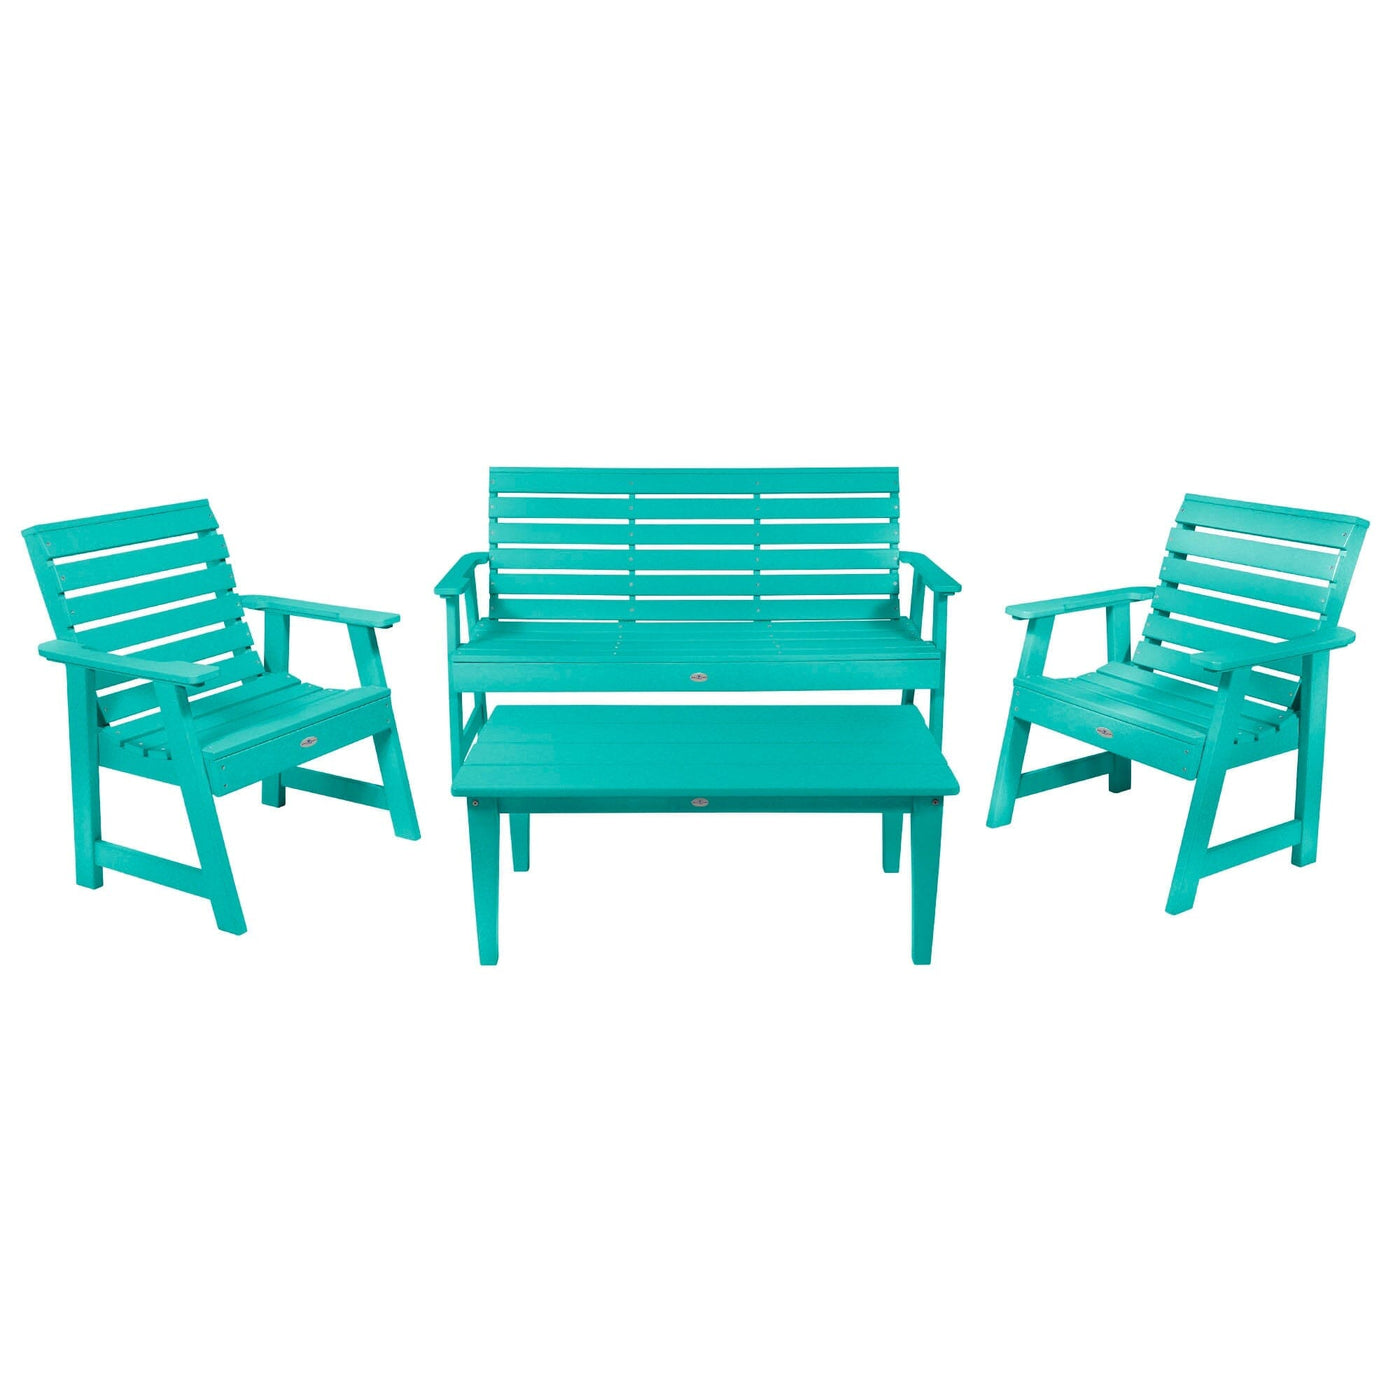 Riverside Garden Bench 5ft, 2 Garden Chairs and Conversation Table Set Kitted Set Bahia Verde Outdoors Seaglass Blue 